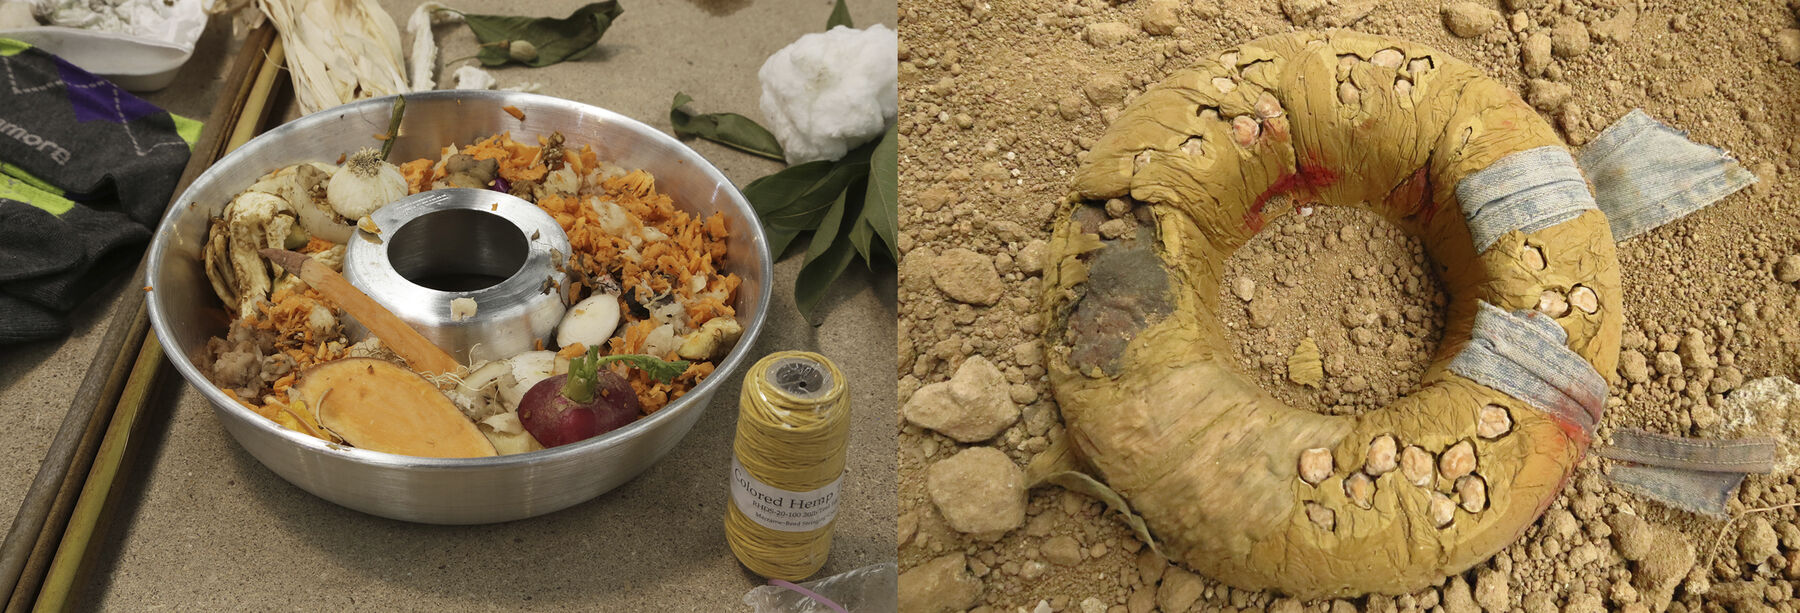 Split view: left, natural ingredients in a metal bowl; right, donut-shaped yellow block of organic material on dirt